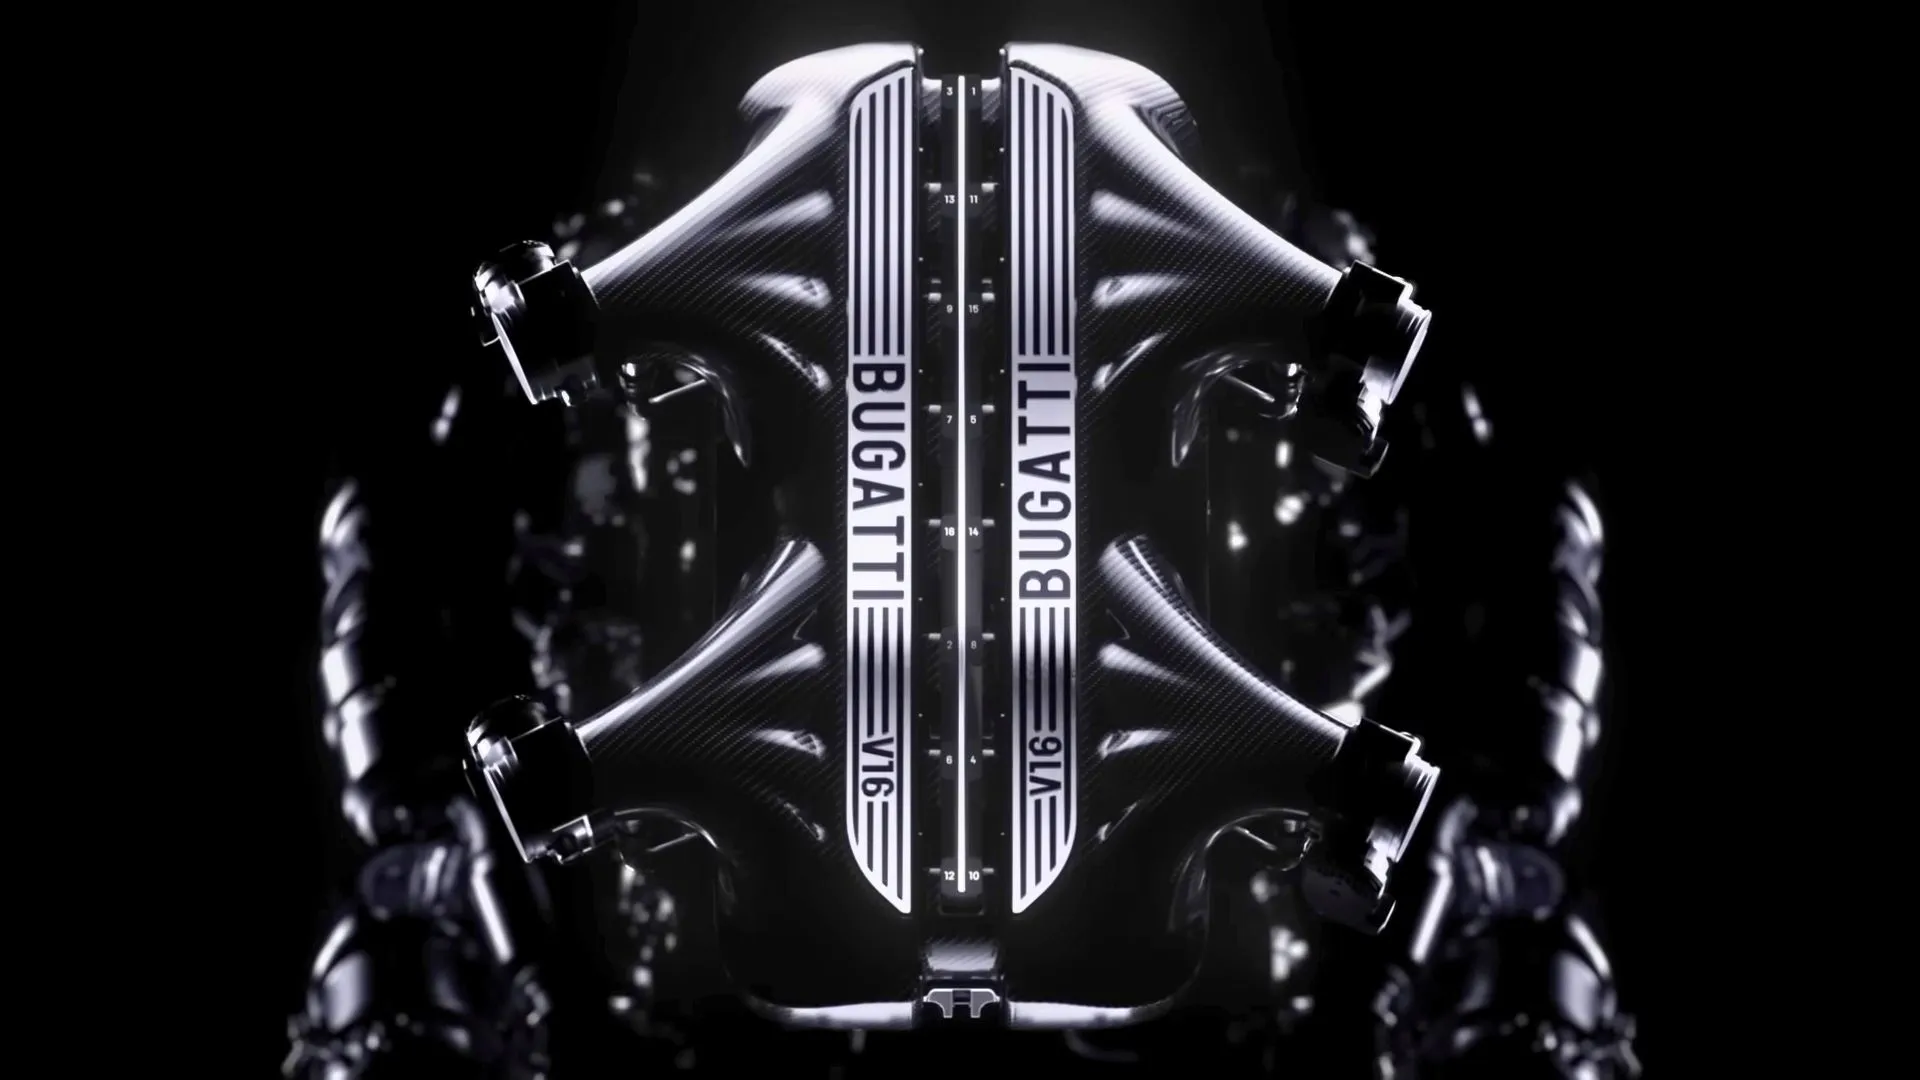 Bugatti has announced a new V16 hybrid engine that allows the car to reach speeds of up to 445km/h